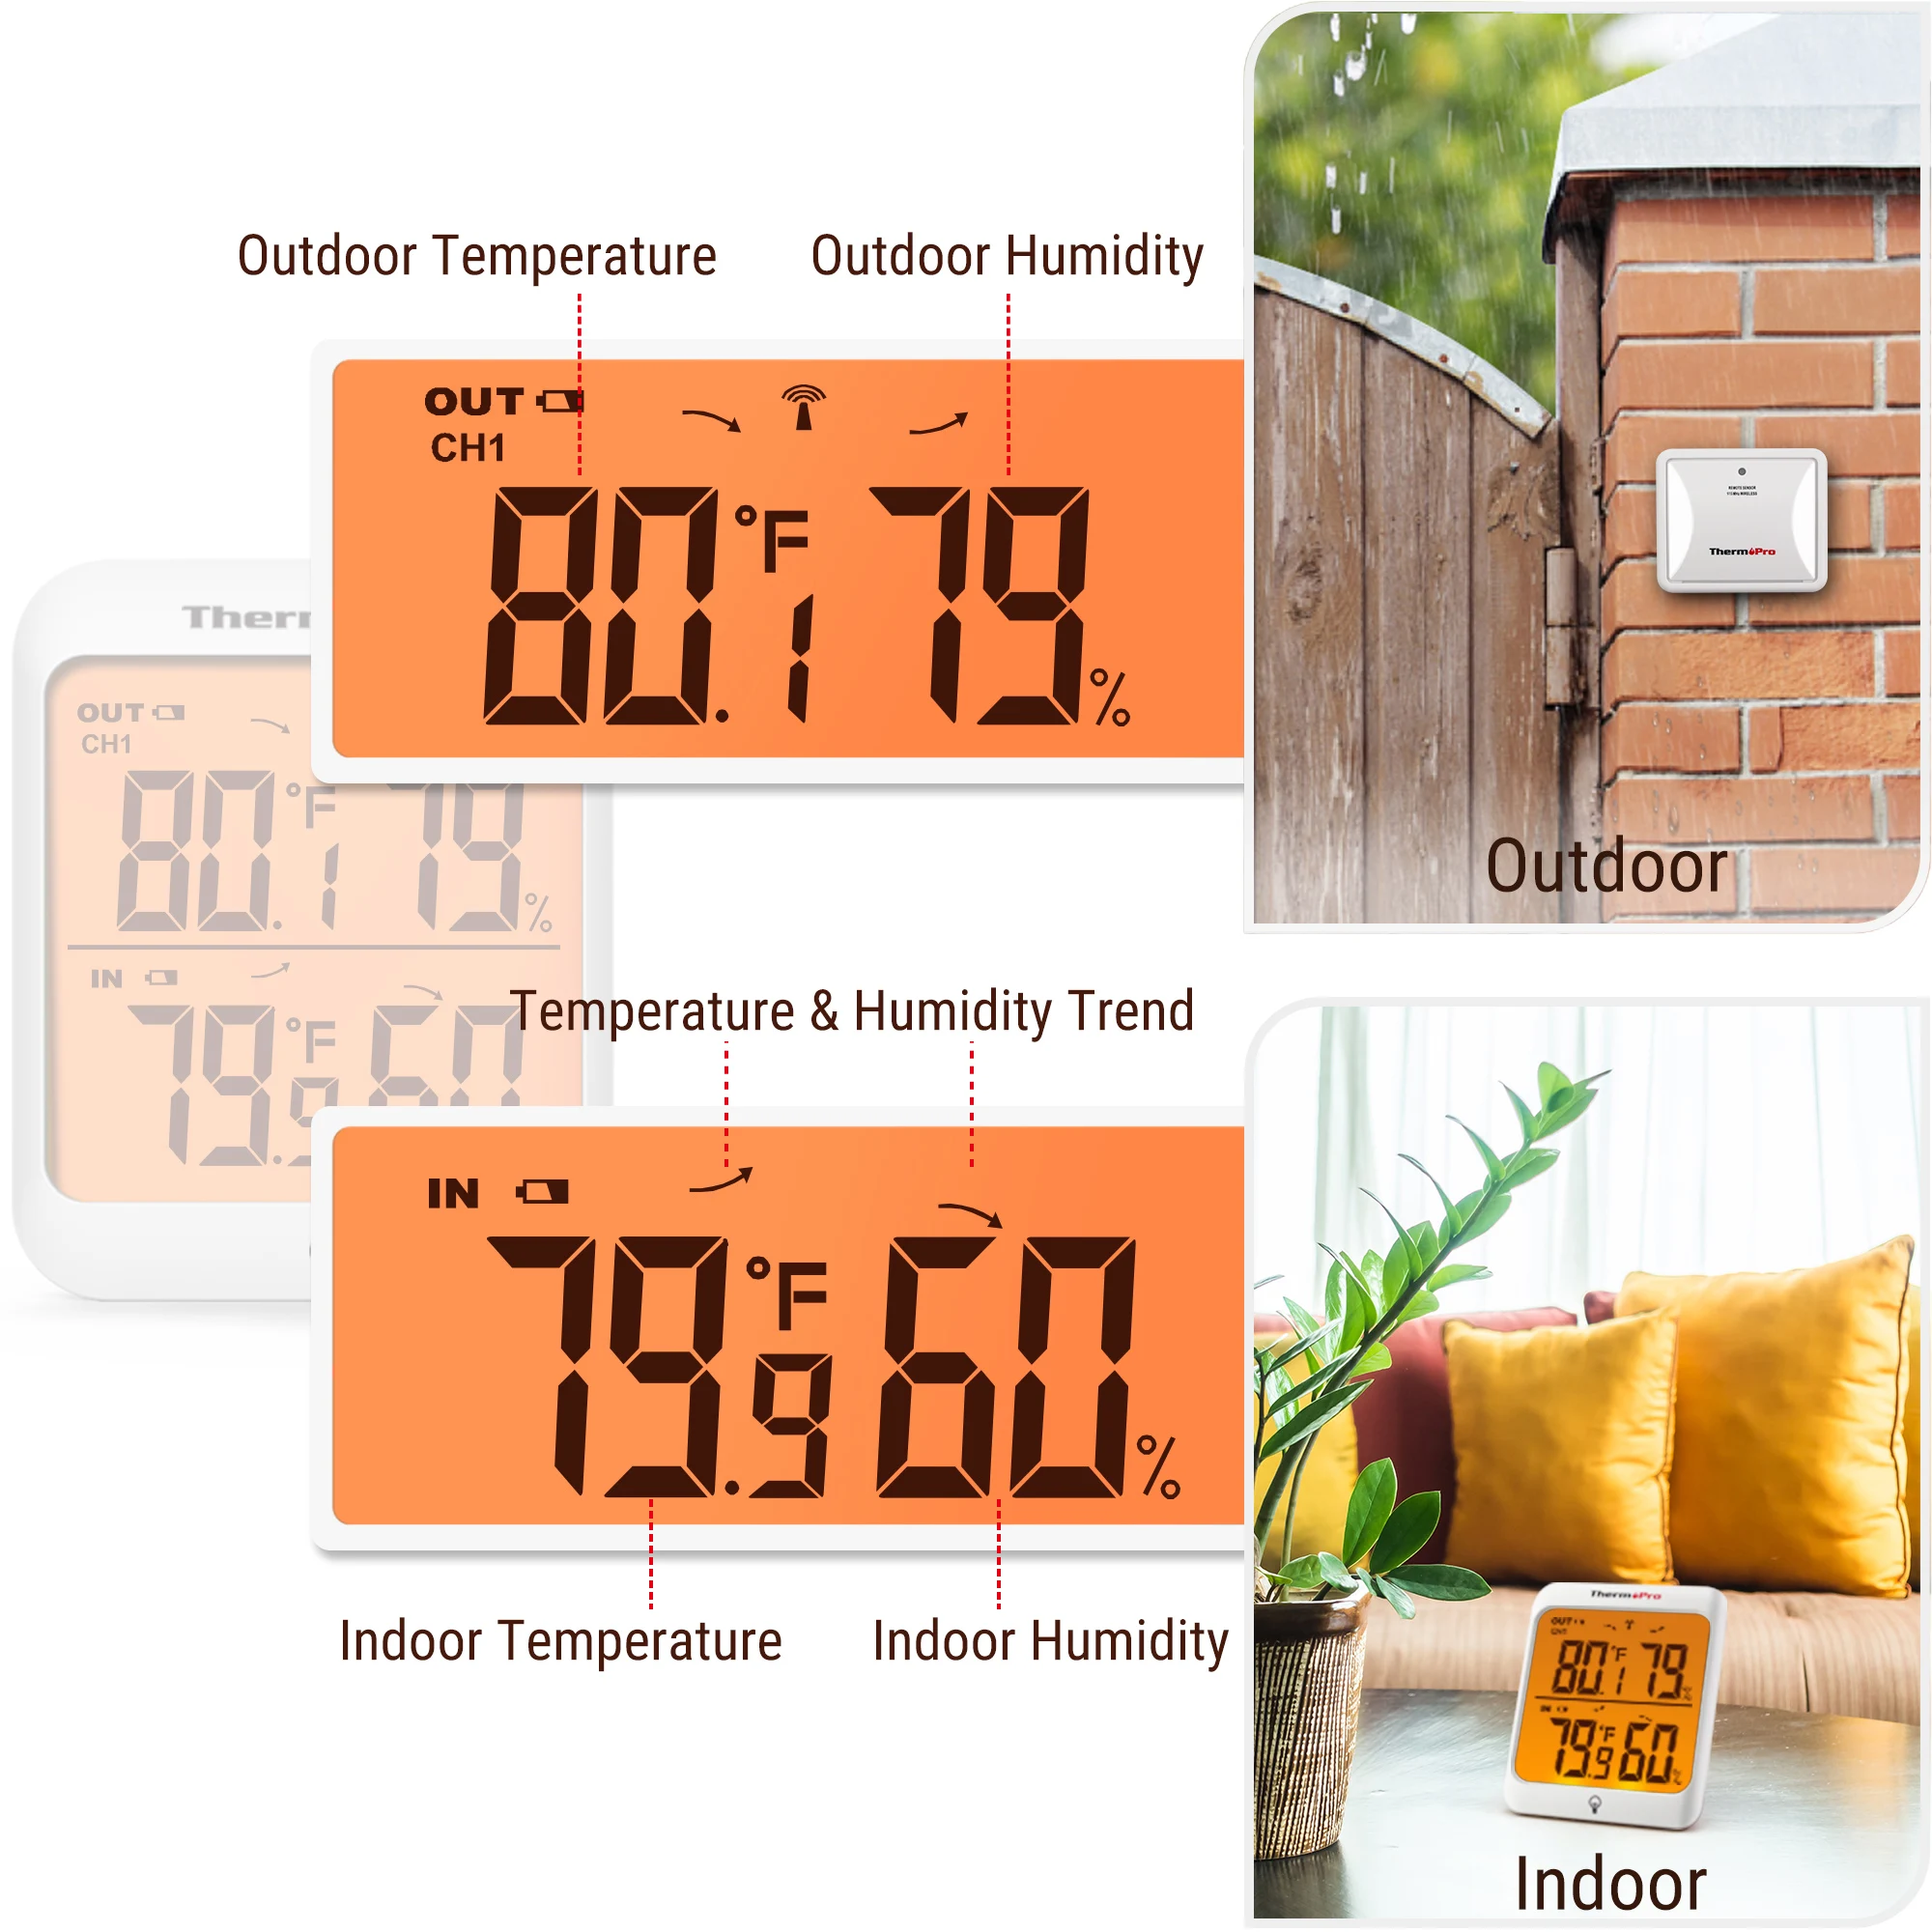 ThermoPro TP63C 60M Wireless Indoor Outdoor Weather Station